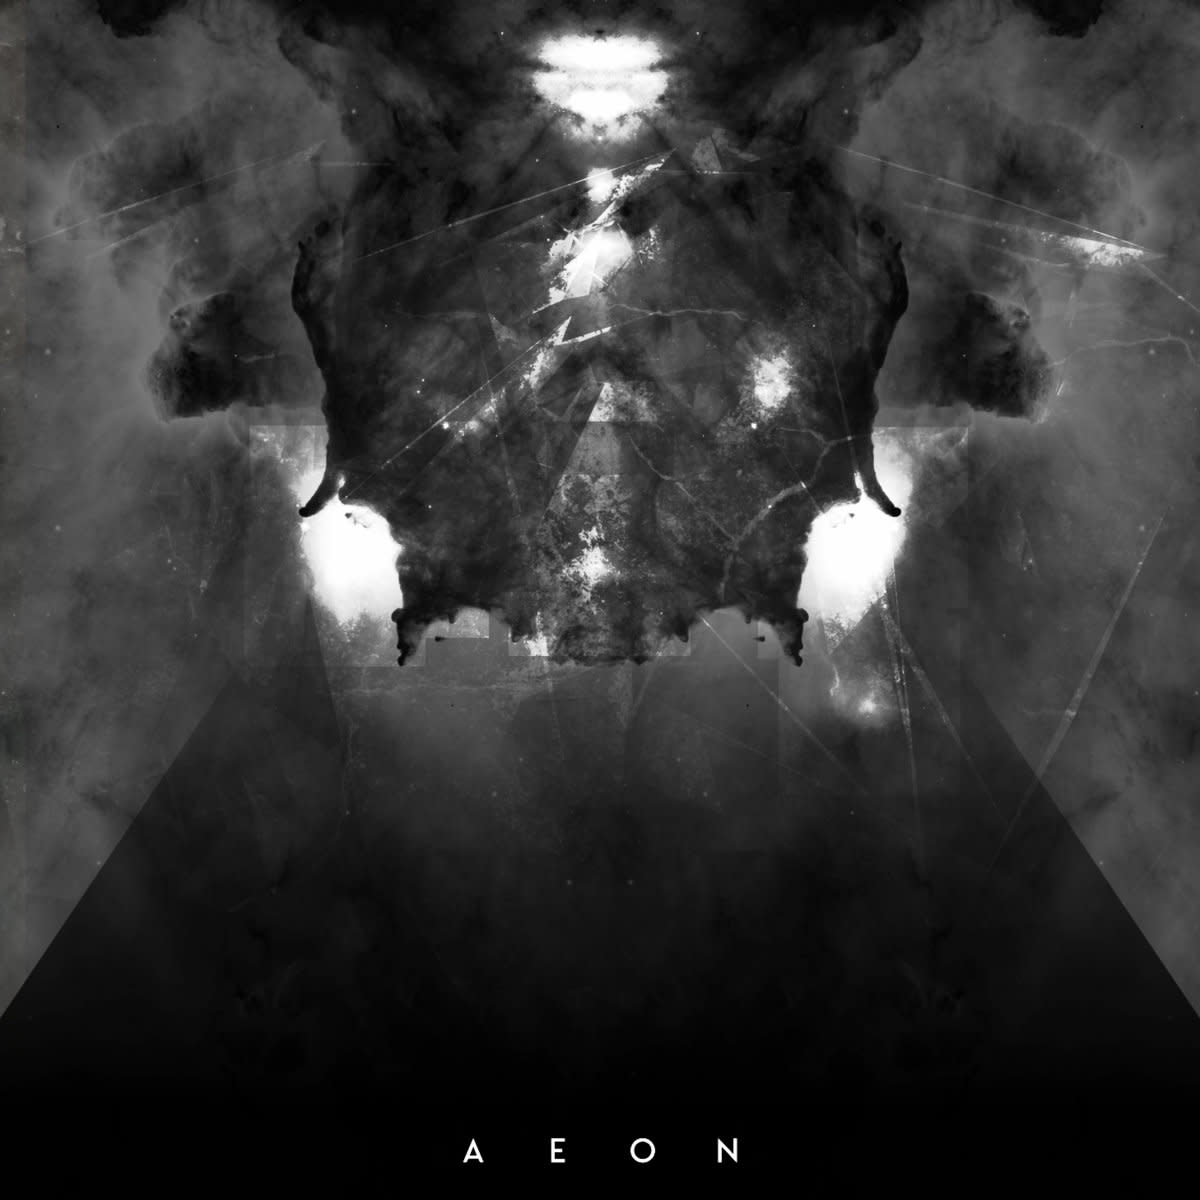 synth-ep-review-aeon-by-macrowave